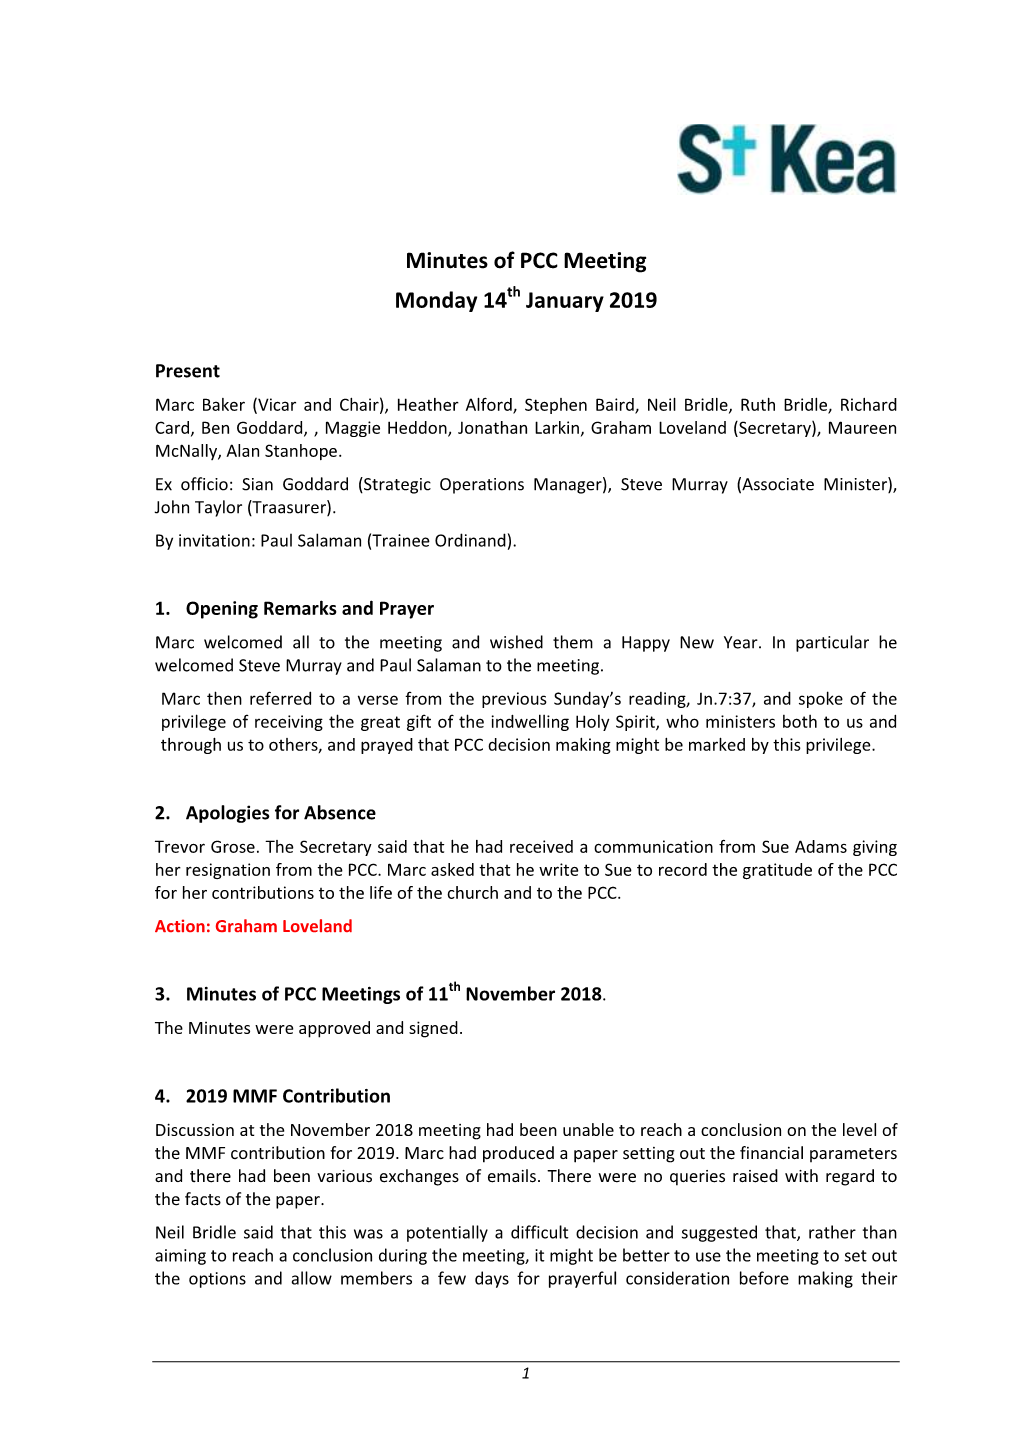 Minutes of PCC Meeting Monday 14 January 2019